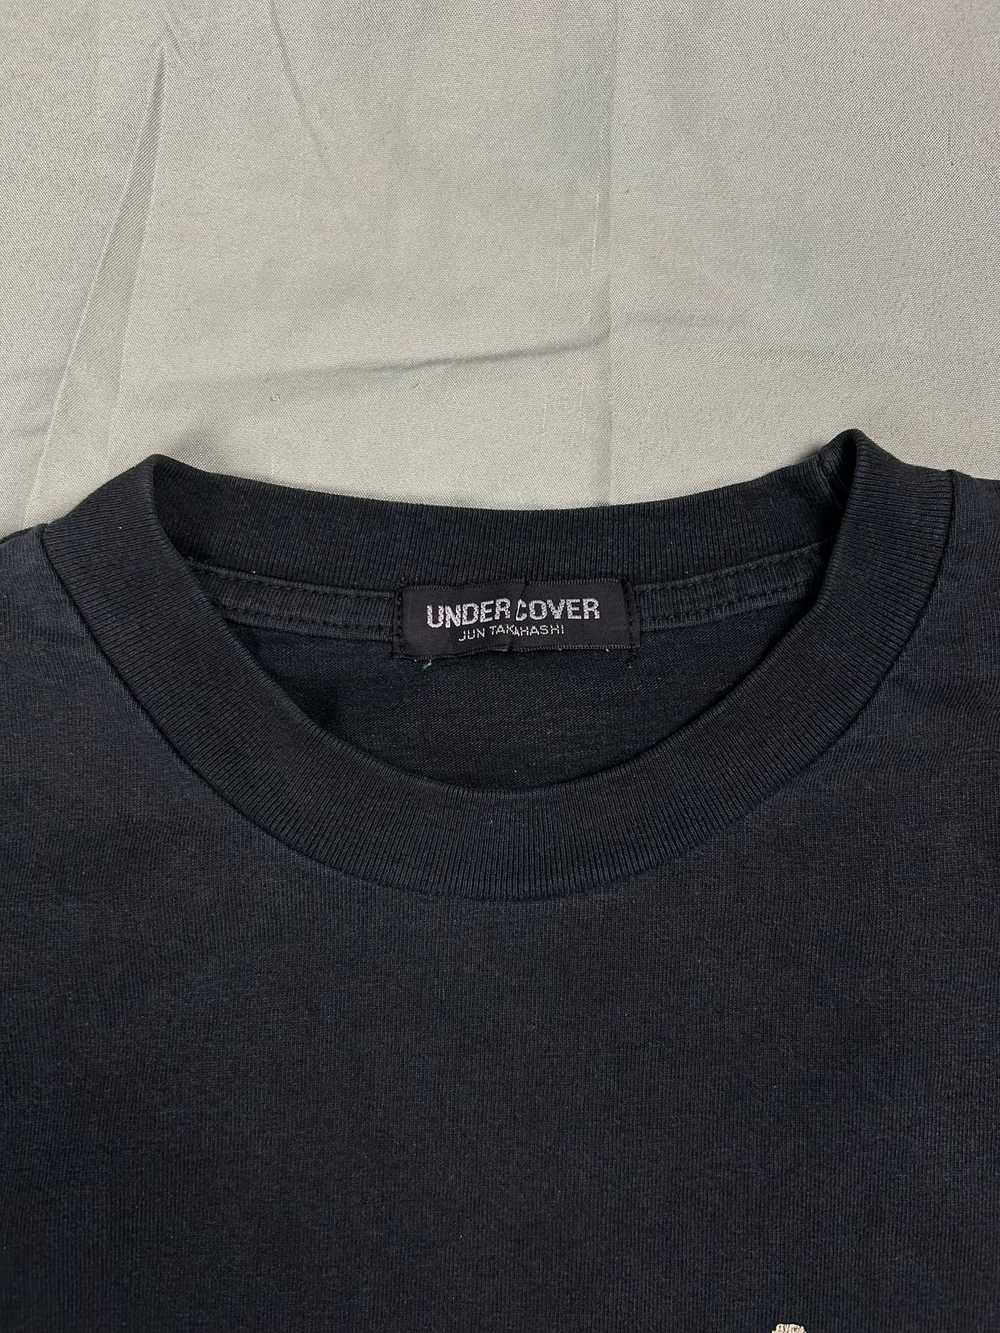 Undercover Undercover Poem Tee AW95 - image 3